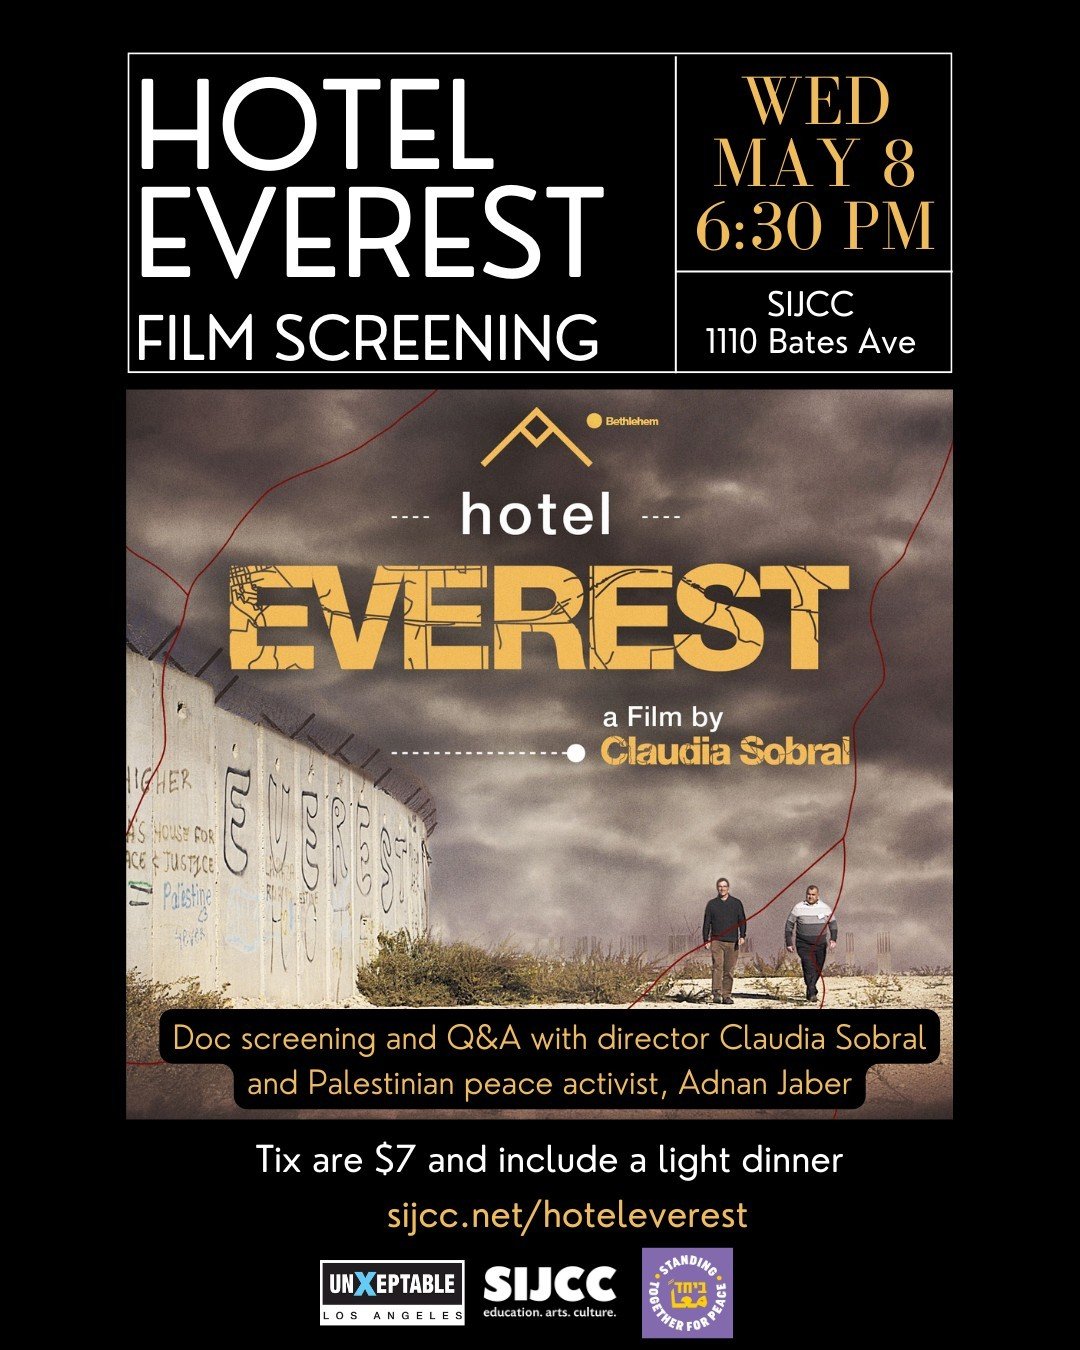 Join us next Wednesday for a doc screening and discussion of the 2017 documentary &quot;Hotel Everest&quot;.⁠
⁠
Hotel Everest is a 2017 documentary about courageous Israelis and Palestinians who came together at the Hotel Everest in 2014, a safe have